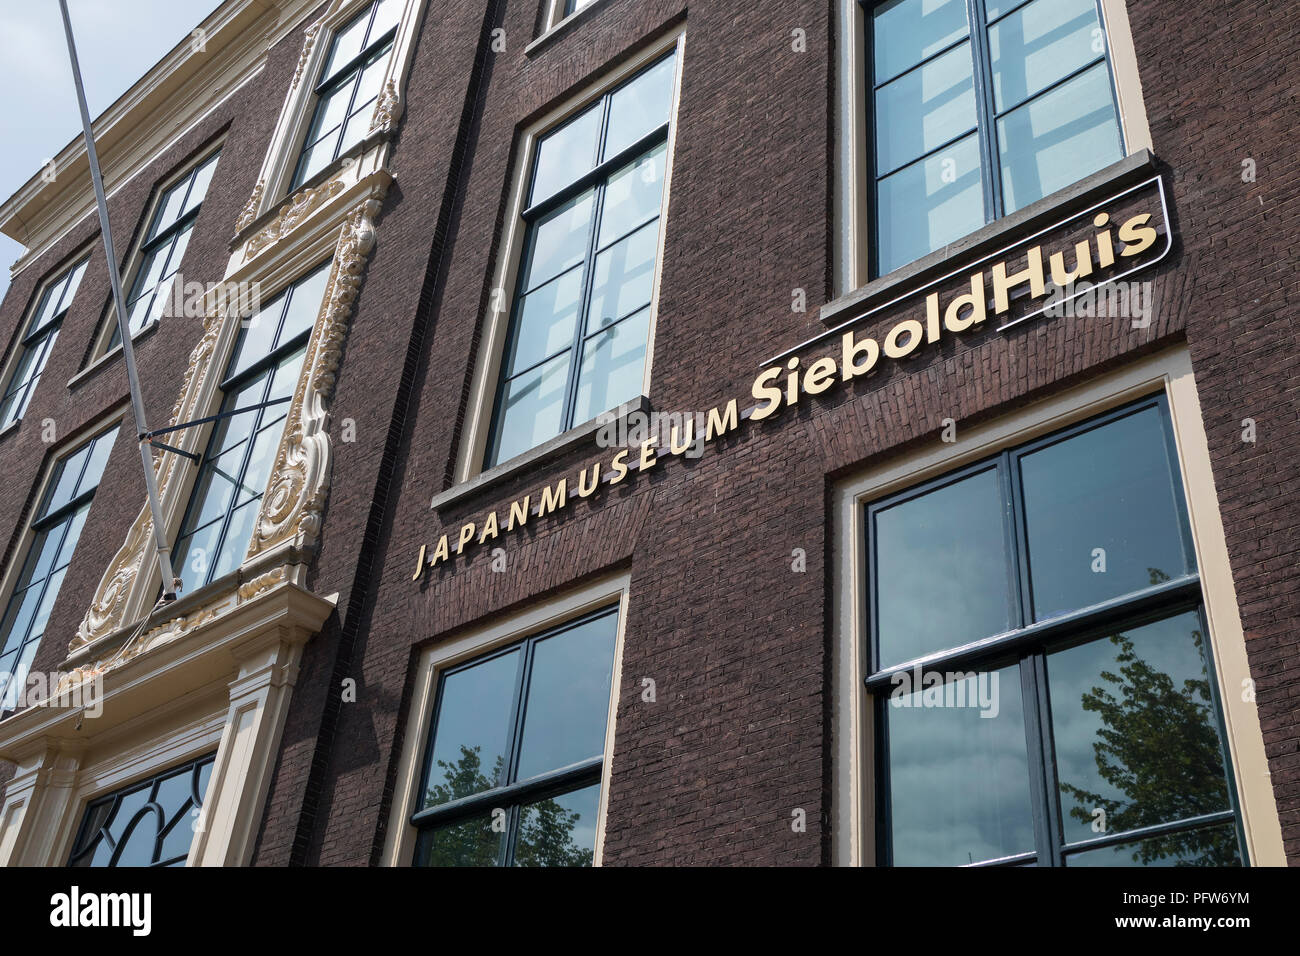 Leiden, Netherlands - July 17, 2018: Facade of the Sieboldhuis, Japan museum in the center of Leiden Stock Photo